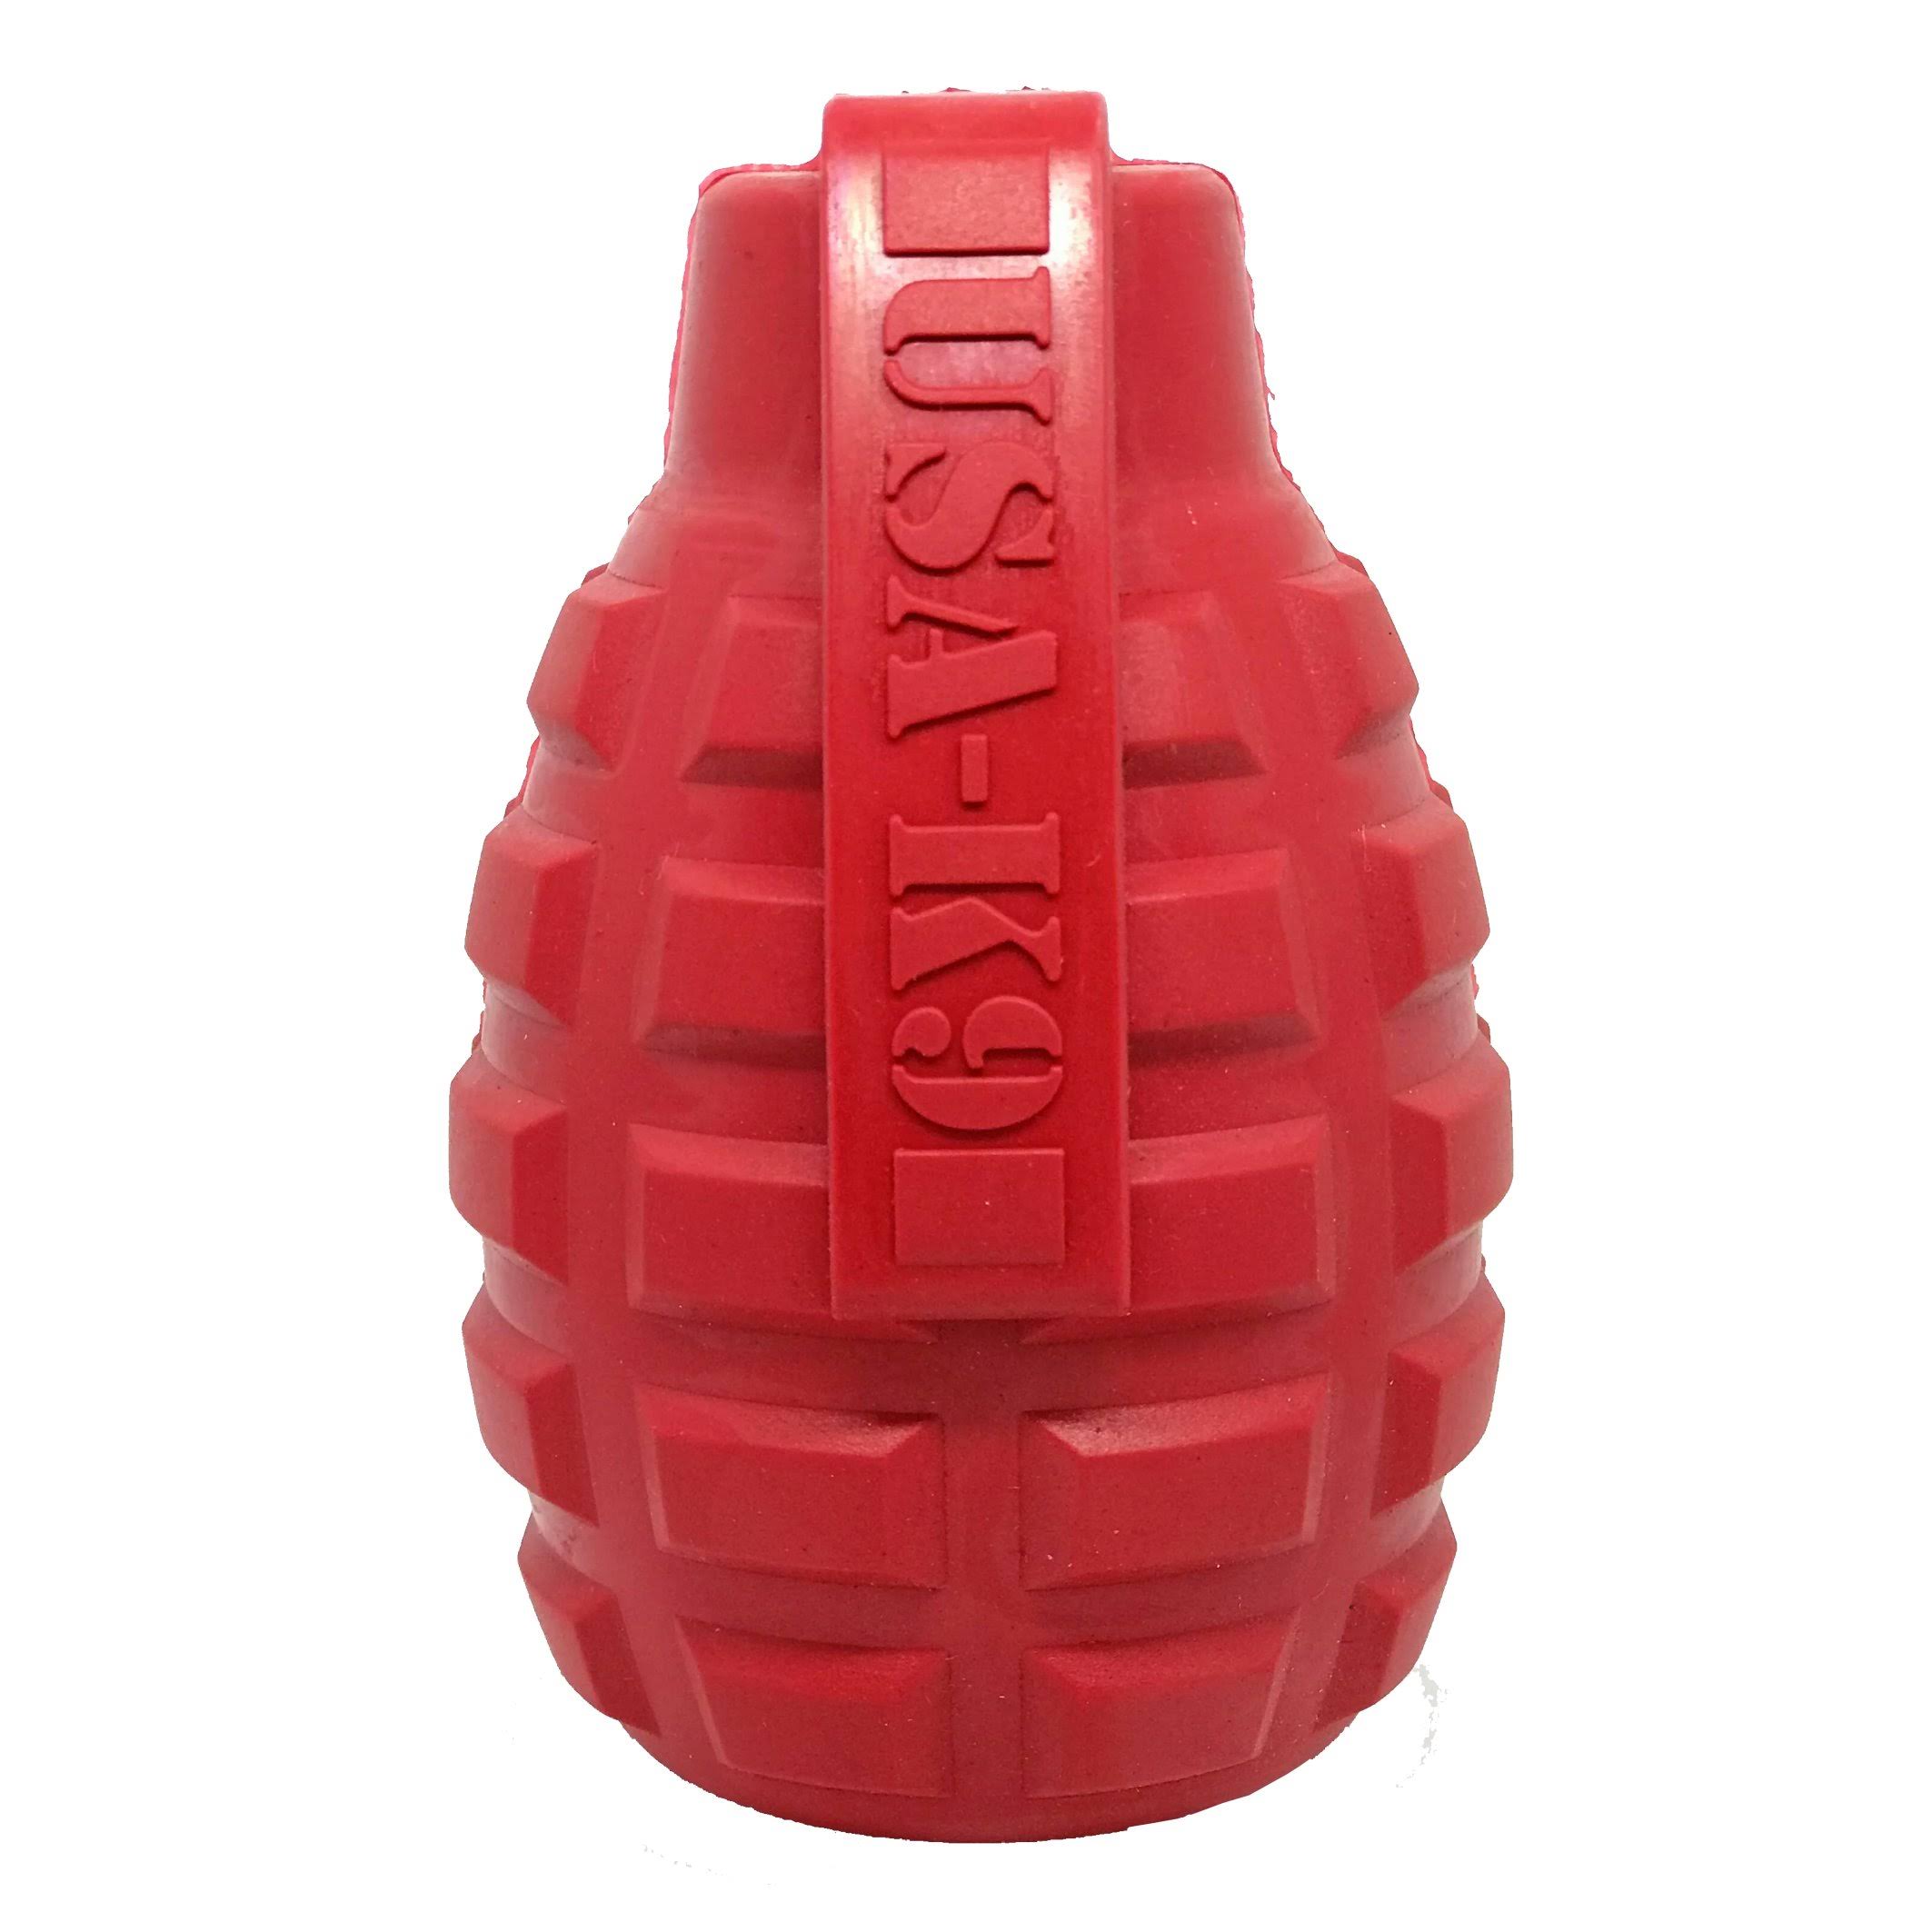 USA-K9 Grenade Rubber Treat Dispensing & Chew Toy, Large / Red